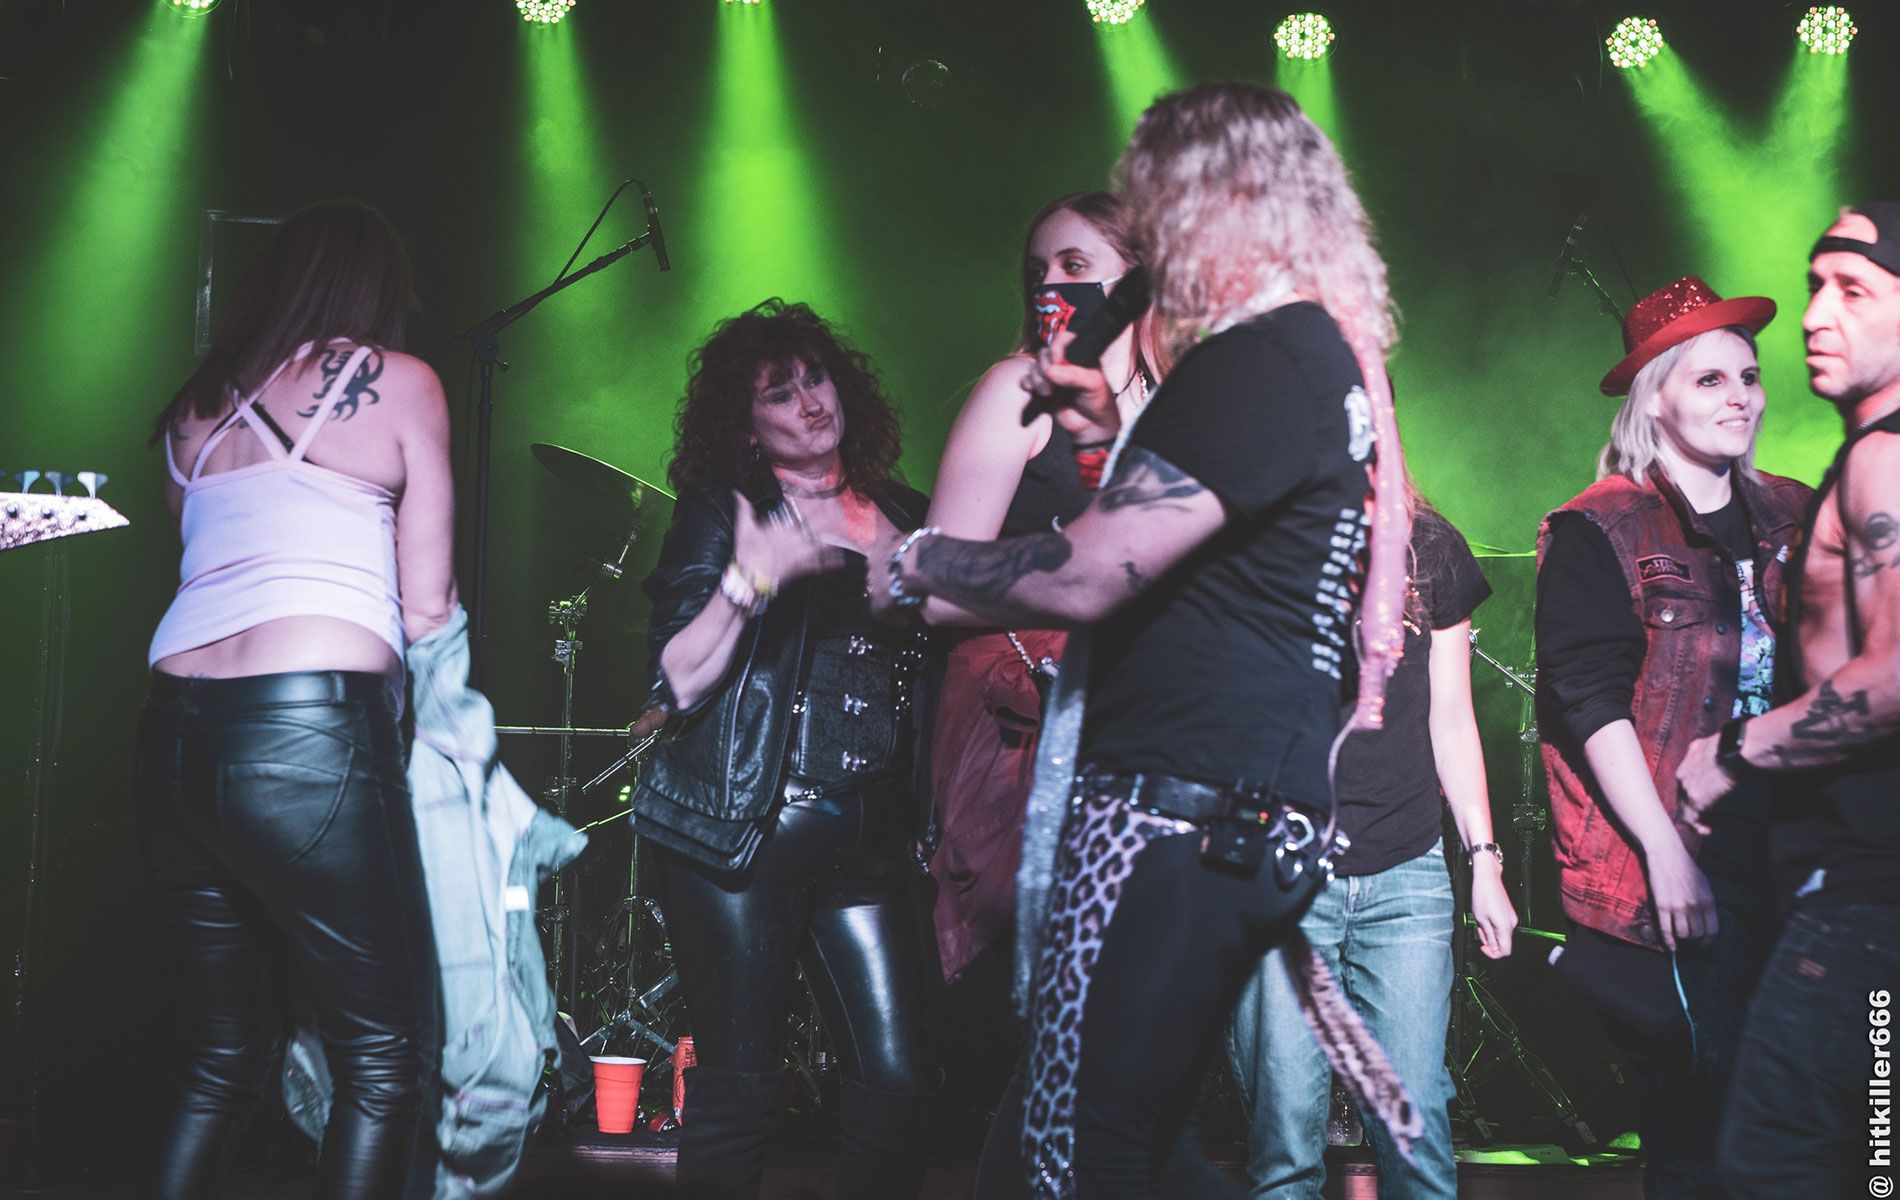 Steel-Panther-L-A-Maybe-Shakal-Today-0068.jpg